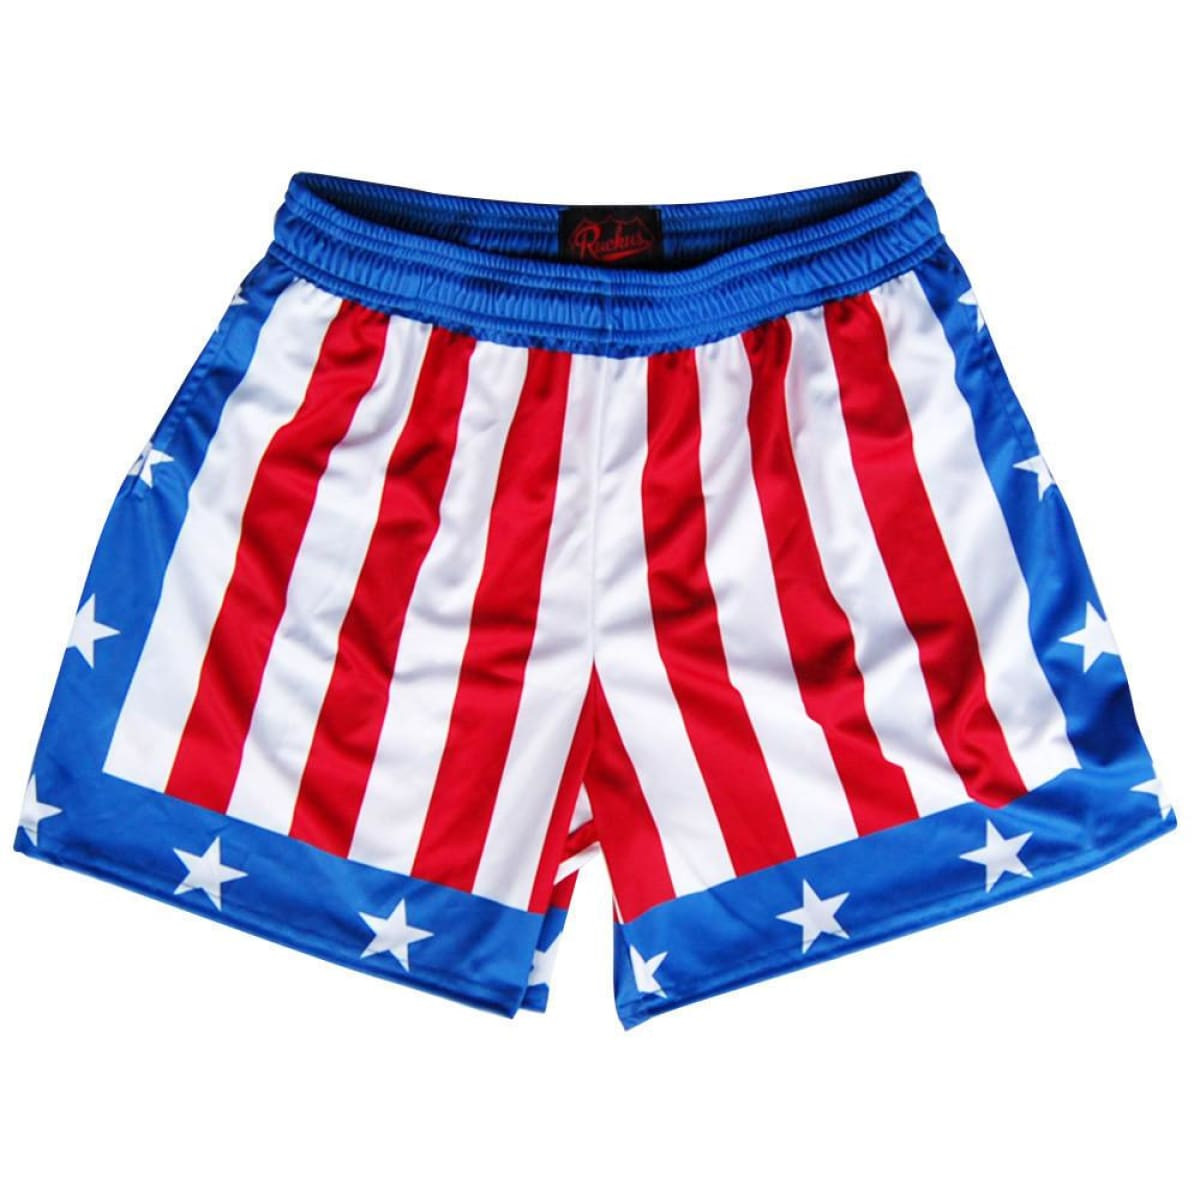 Image of The Champ Rugby Gym Short 5 Inch Inseam With Pockets Made In USA - Red White & Blue